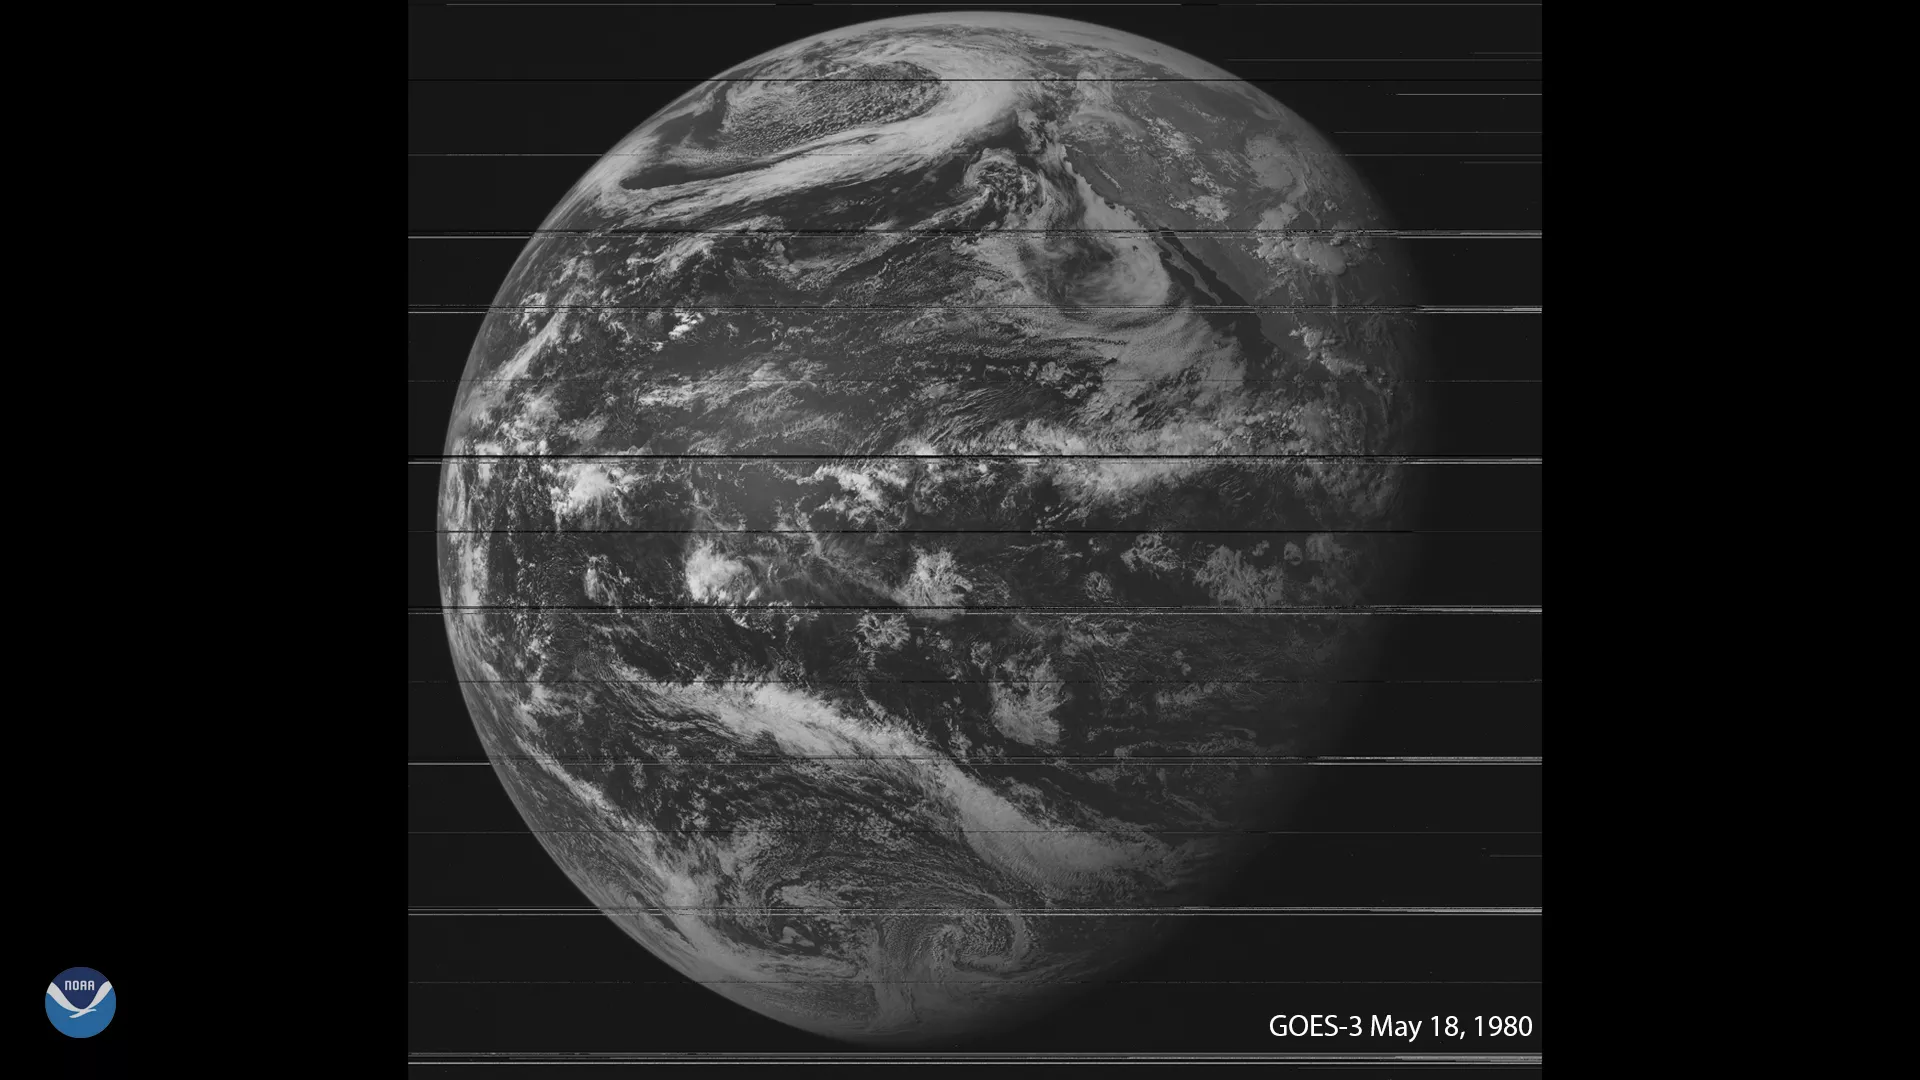 GOES-3 full-disk view of Earth on May 18, 1980